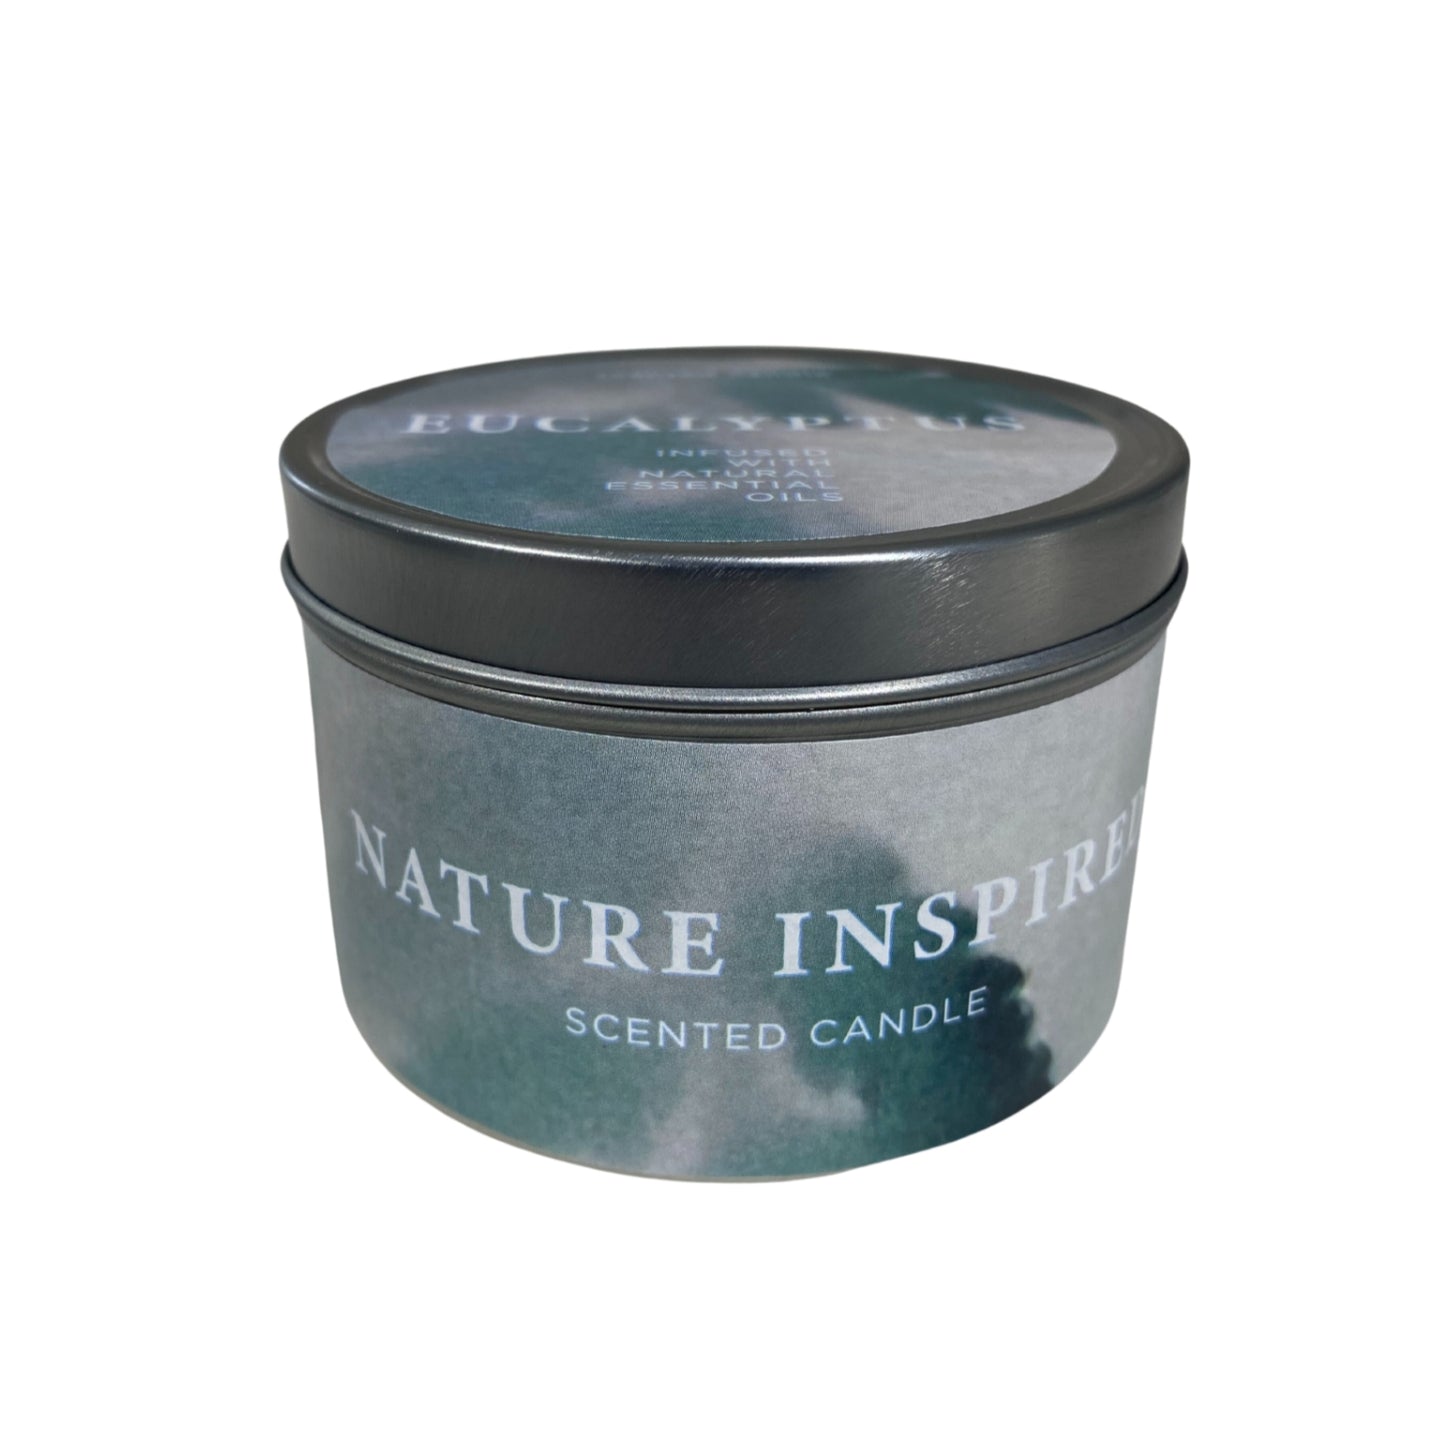 "FOREST MOOD" soy candle in a metal container with "Eucalyptus" aroma